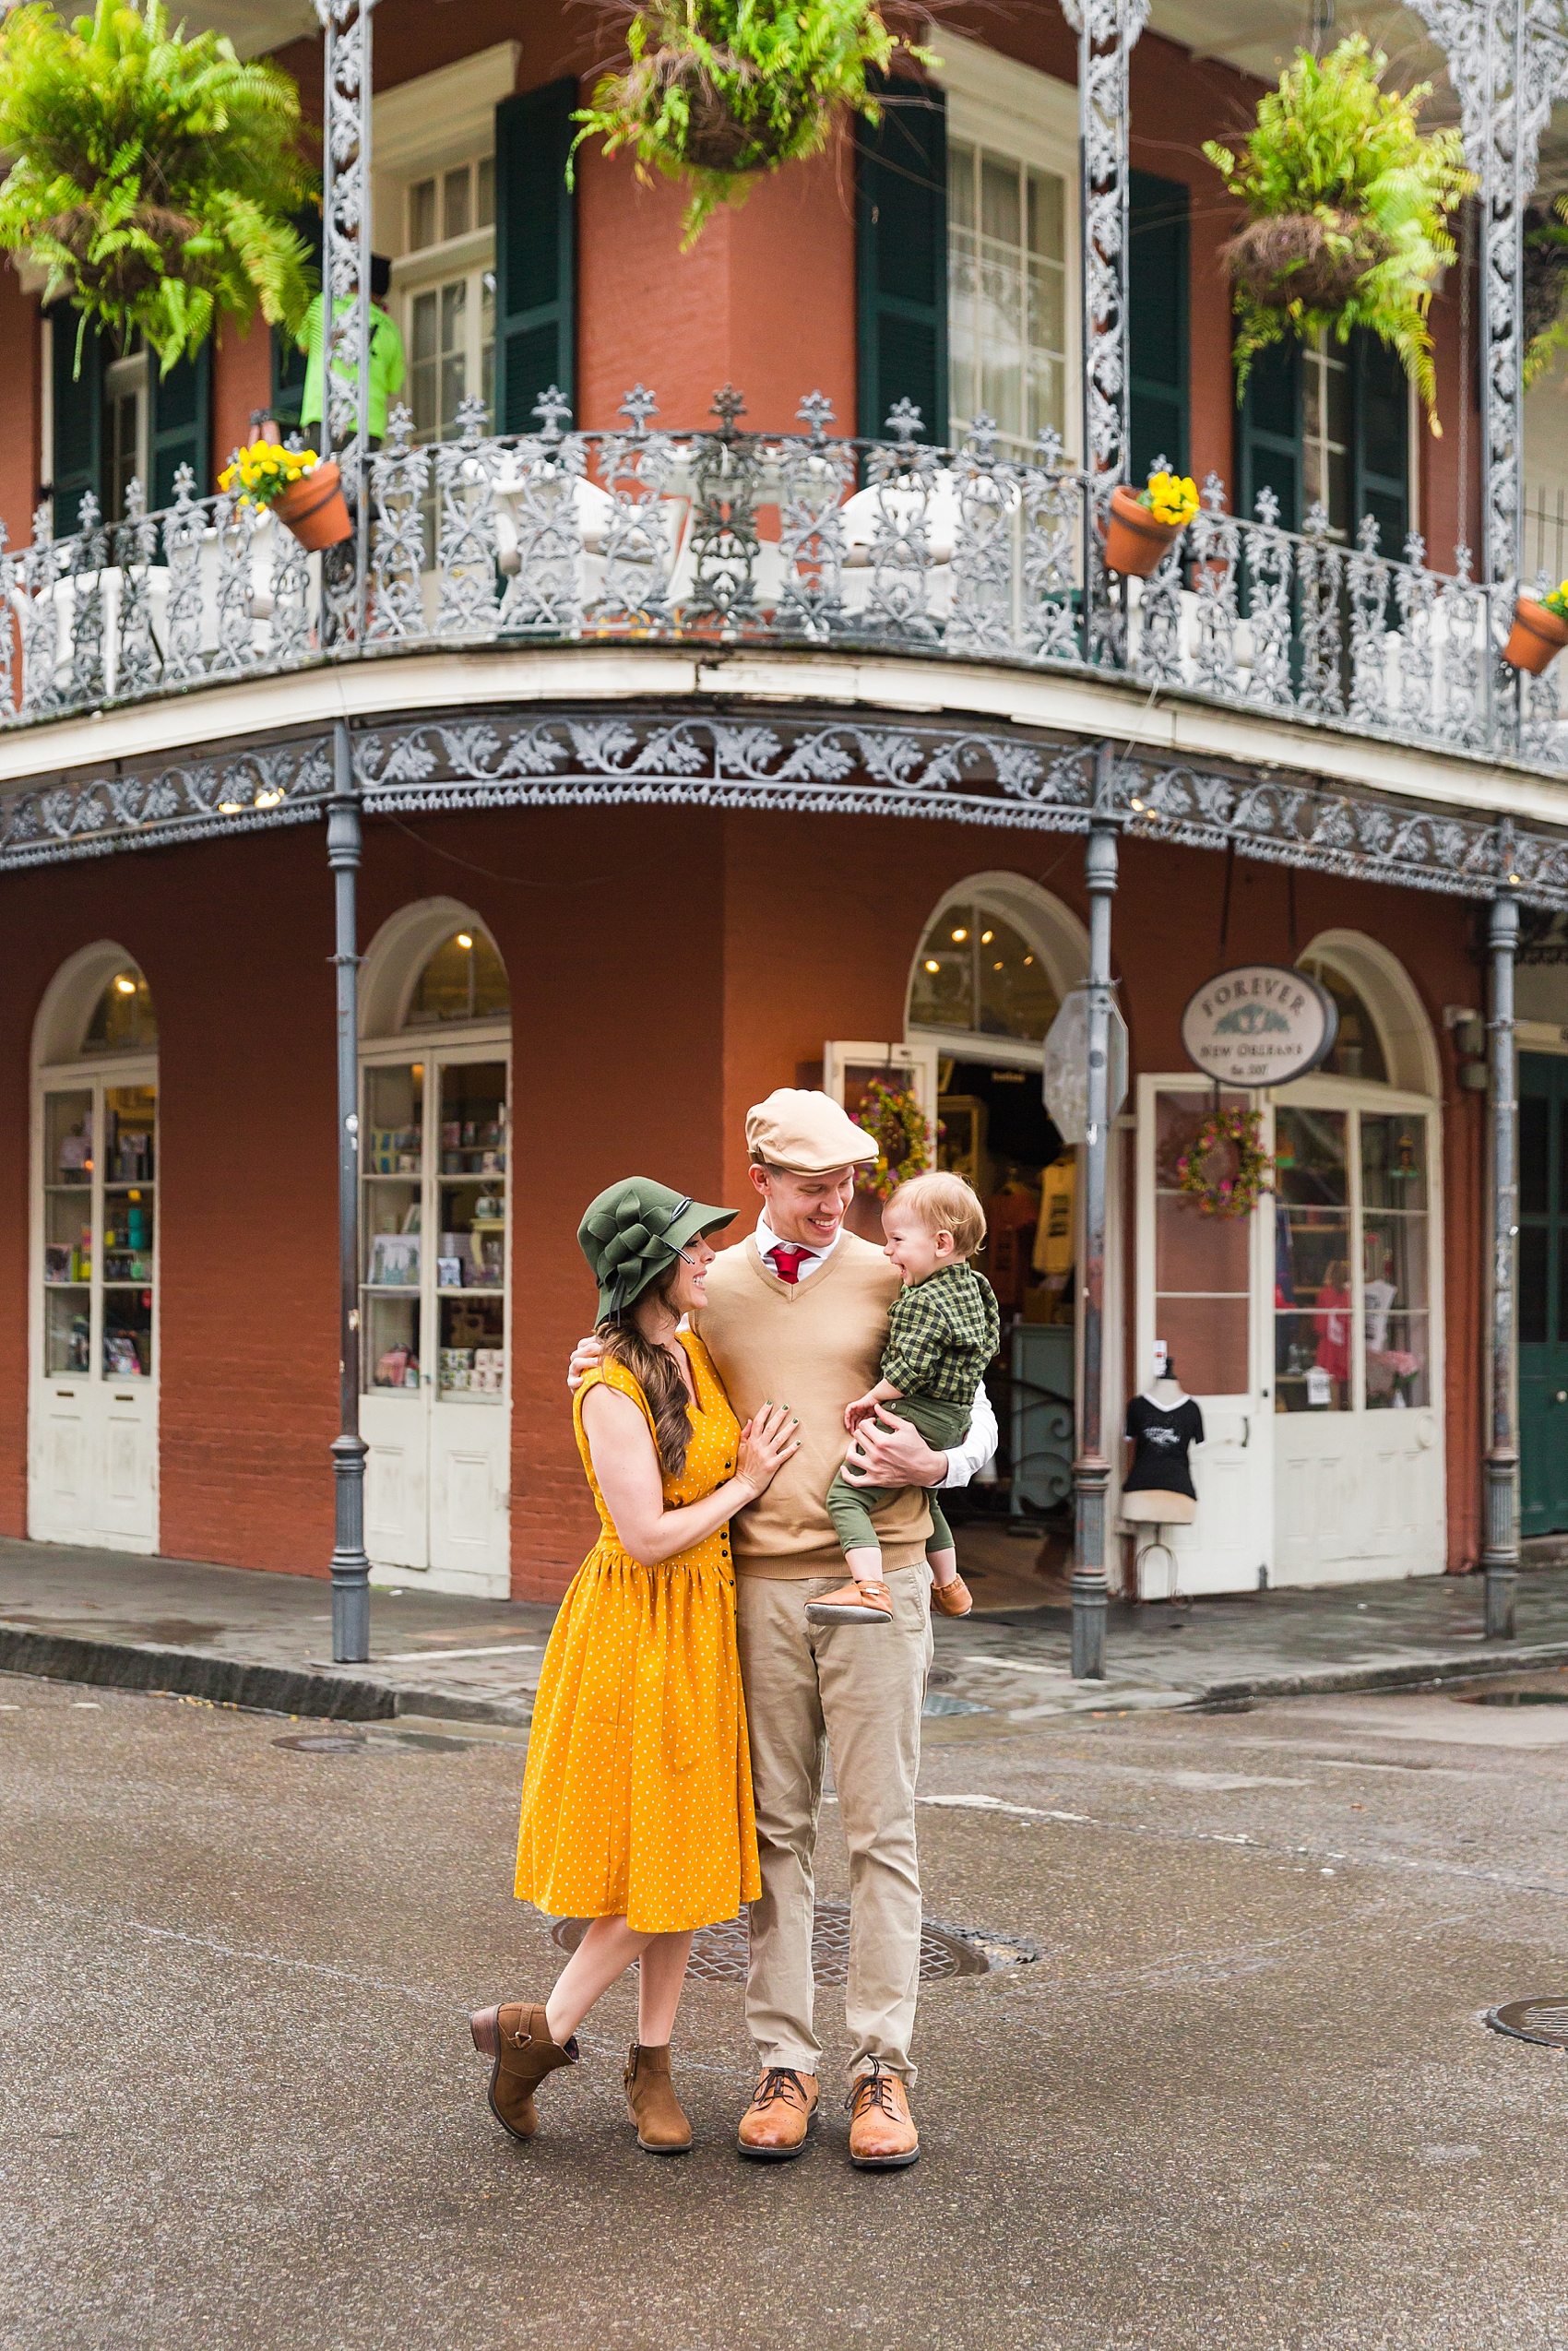 Leah Hope Photography | Scottsdale Phoenix Arizona Photographer | Traveling New Orleans French Quarter NOLA | Family Pictures | Family Photos | What to Wear | Disney Bounding | Princess and The Frog | Disney Family Costumes